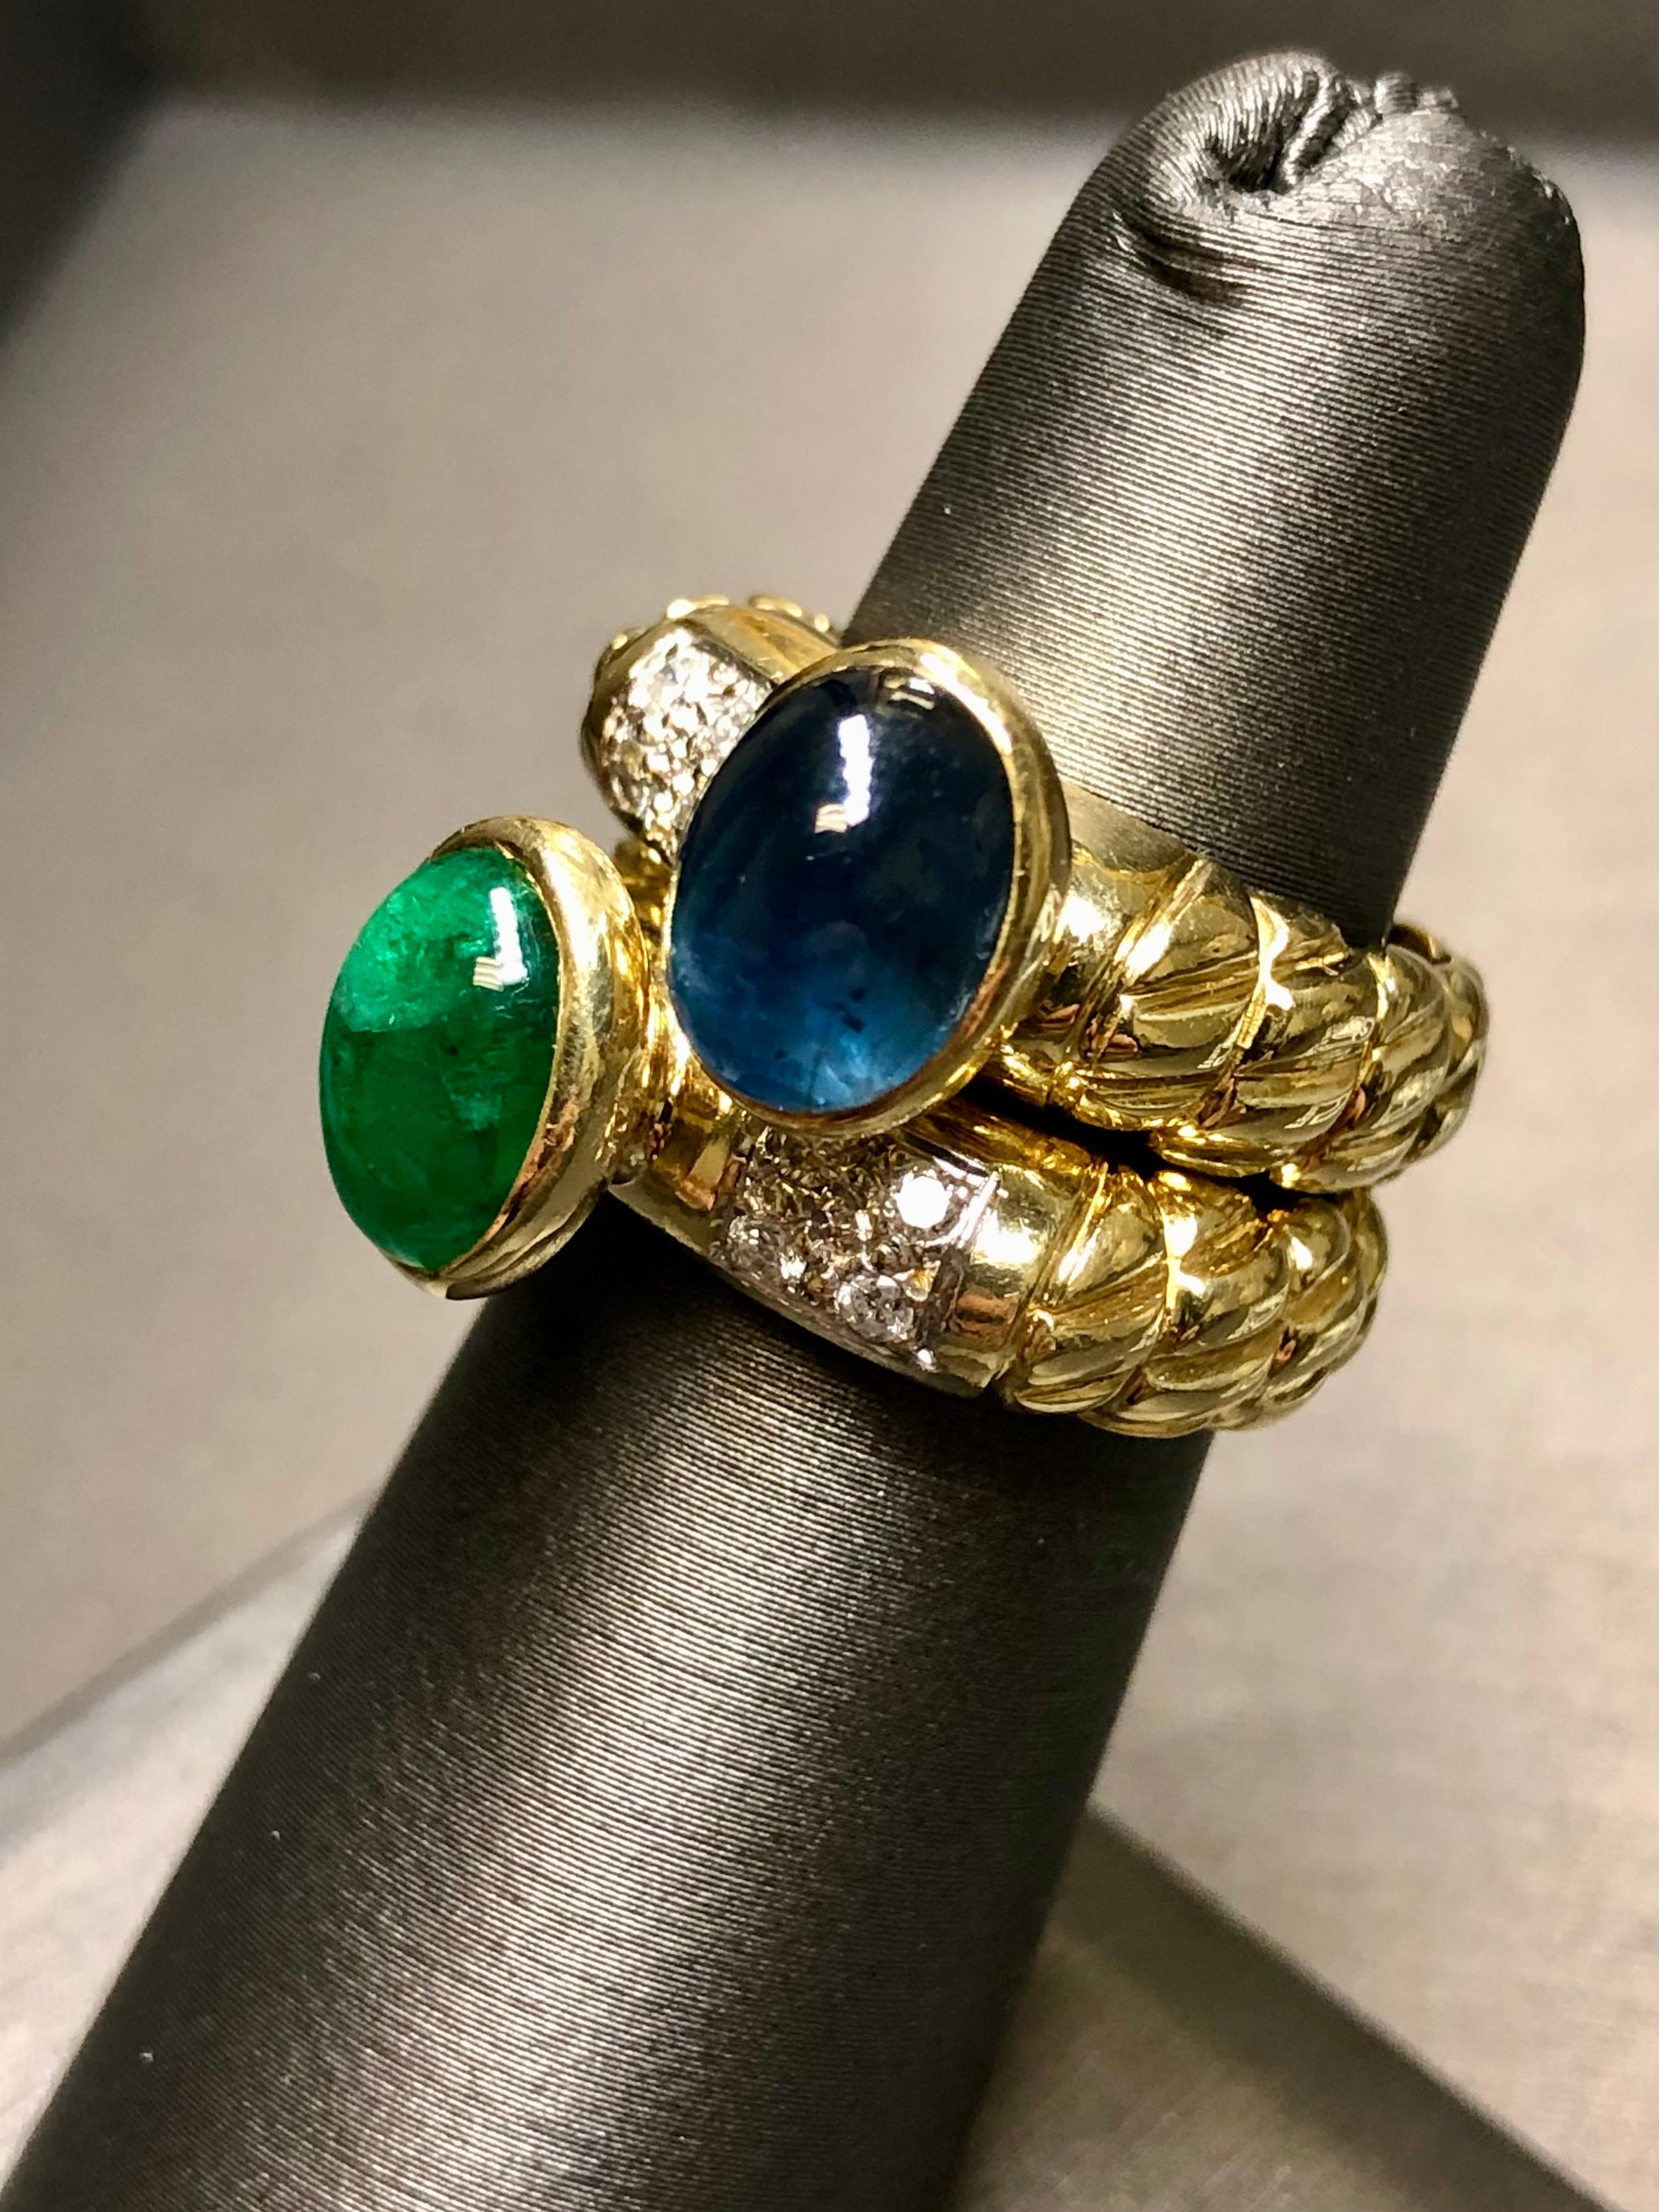 A gorgeous double ring set done in 18K yellow gold with one ring centered by an approximately 2.50ct cabochon emerald and the other a 3.60ct cabochon sapphire. Between both rings there is another approximately .16cttw in H-J color Si1-2 clarity